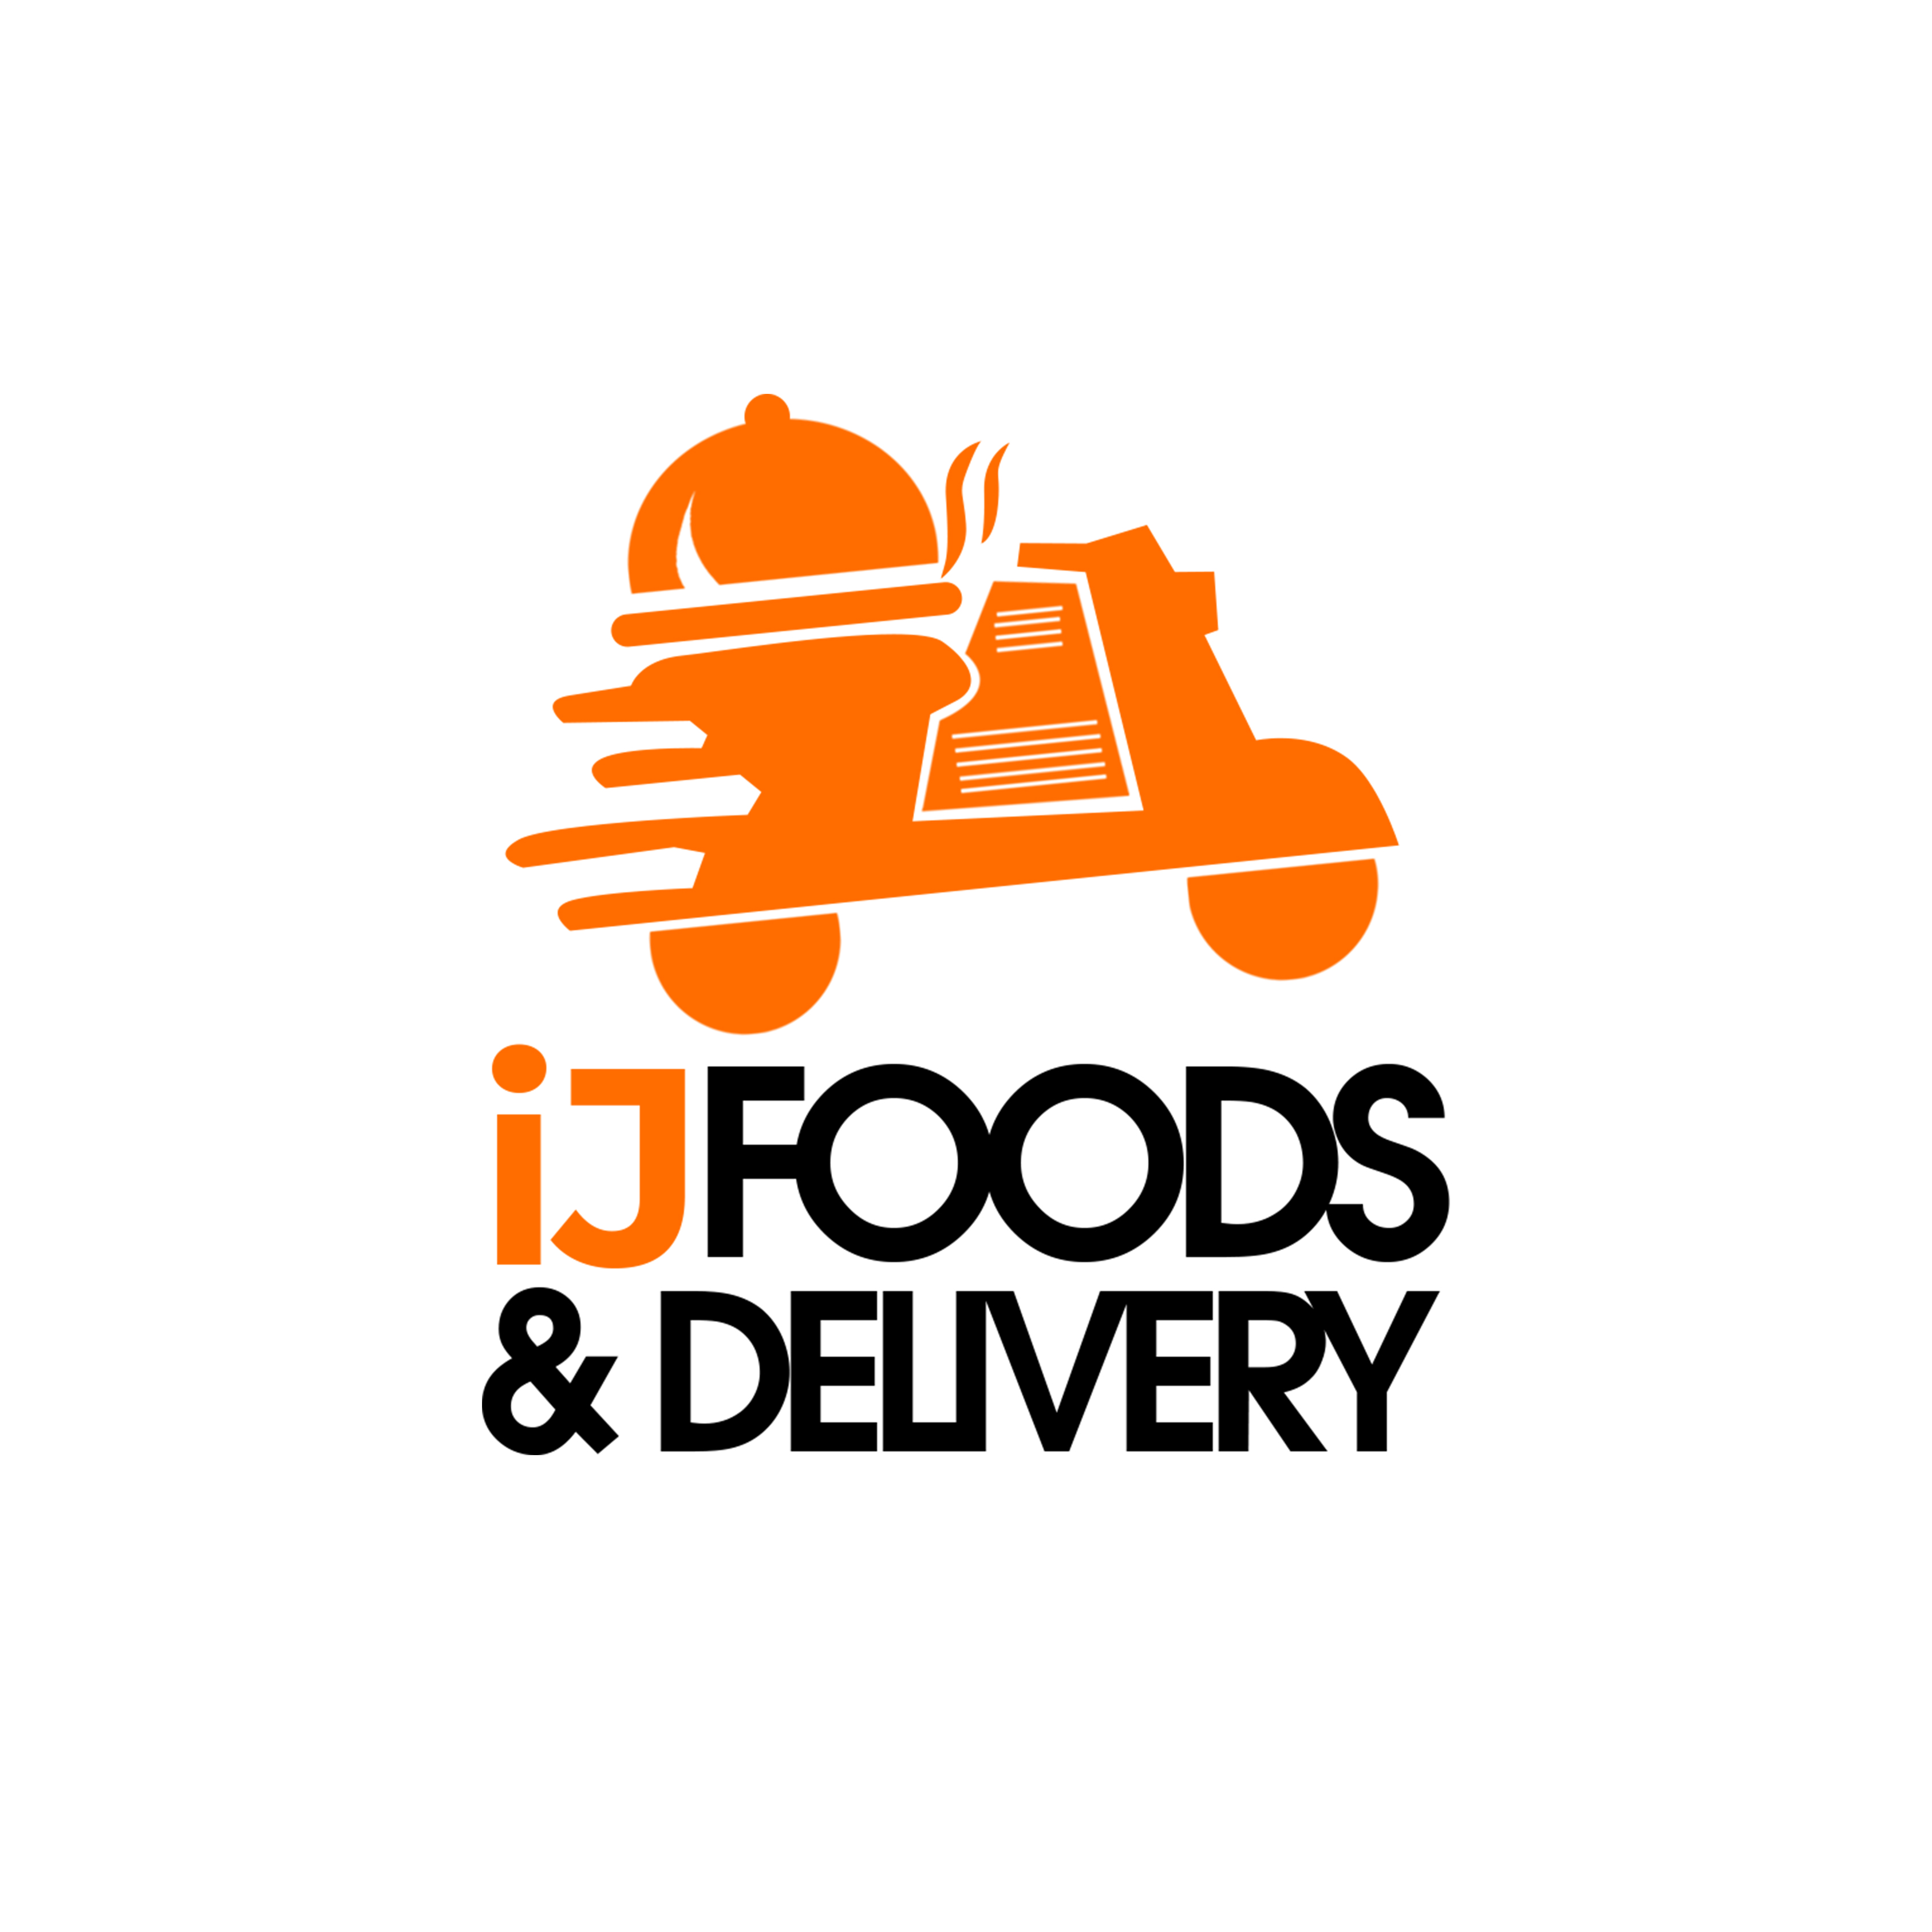 iJFoods & Delivery provider